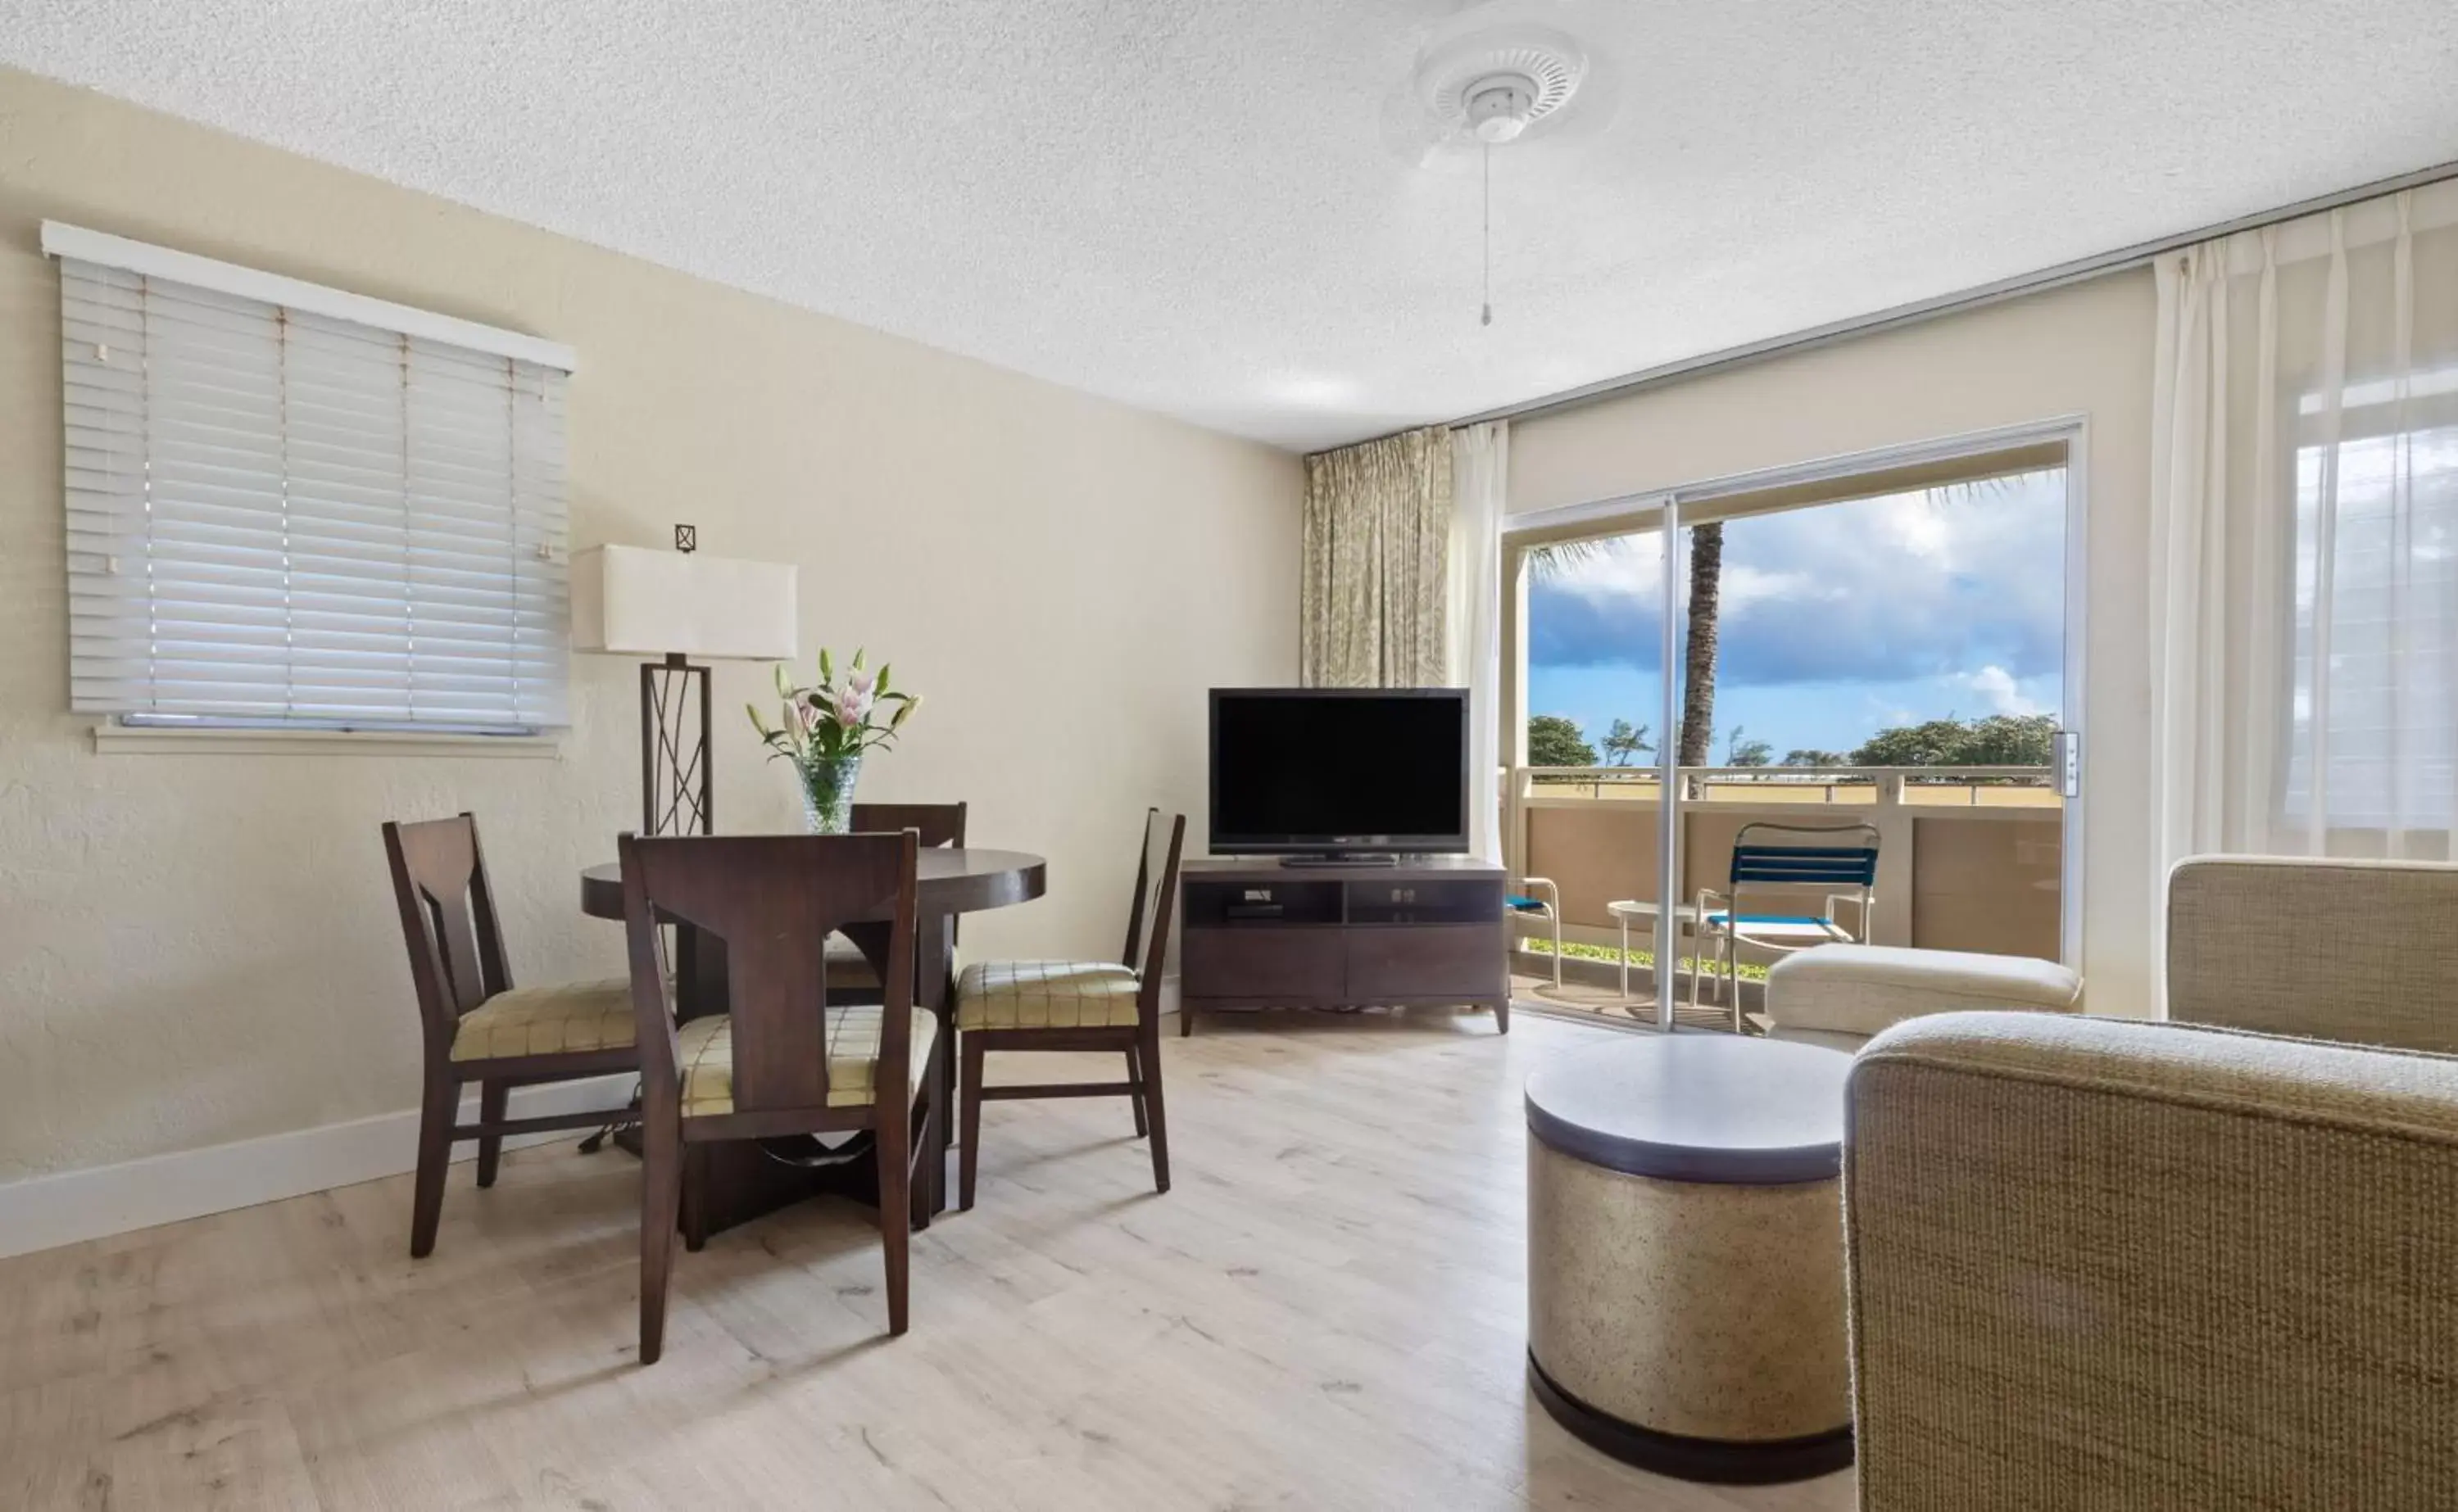 TV and multimedia, Dining Area in Plantation Hale Suites